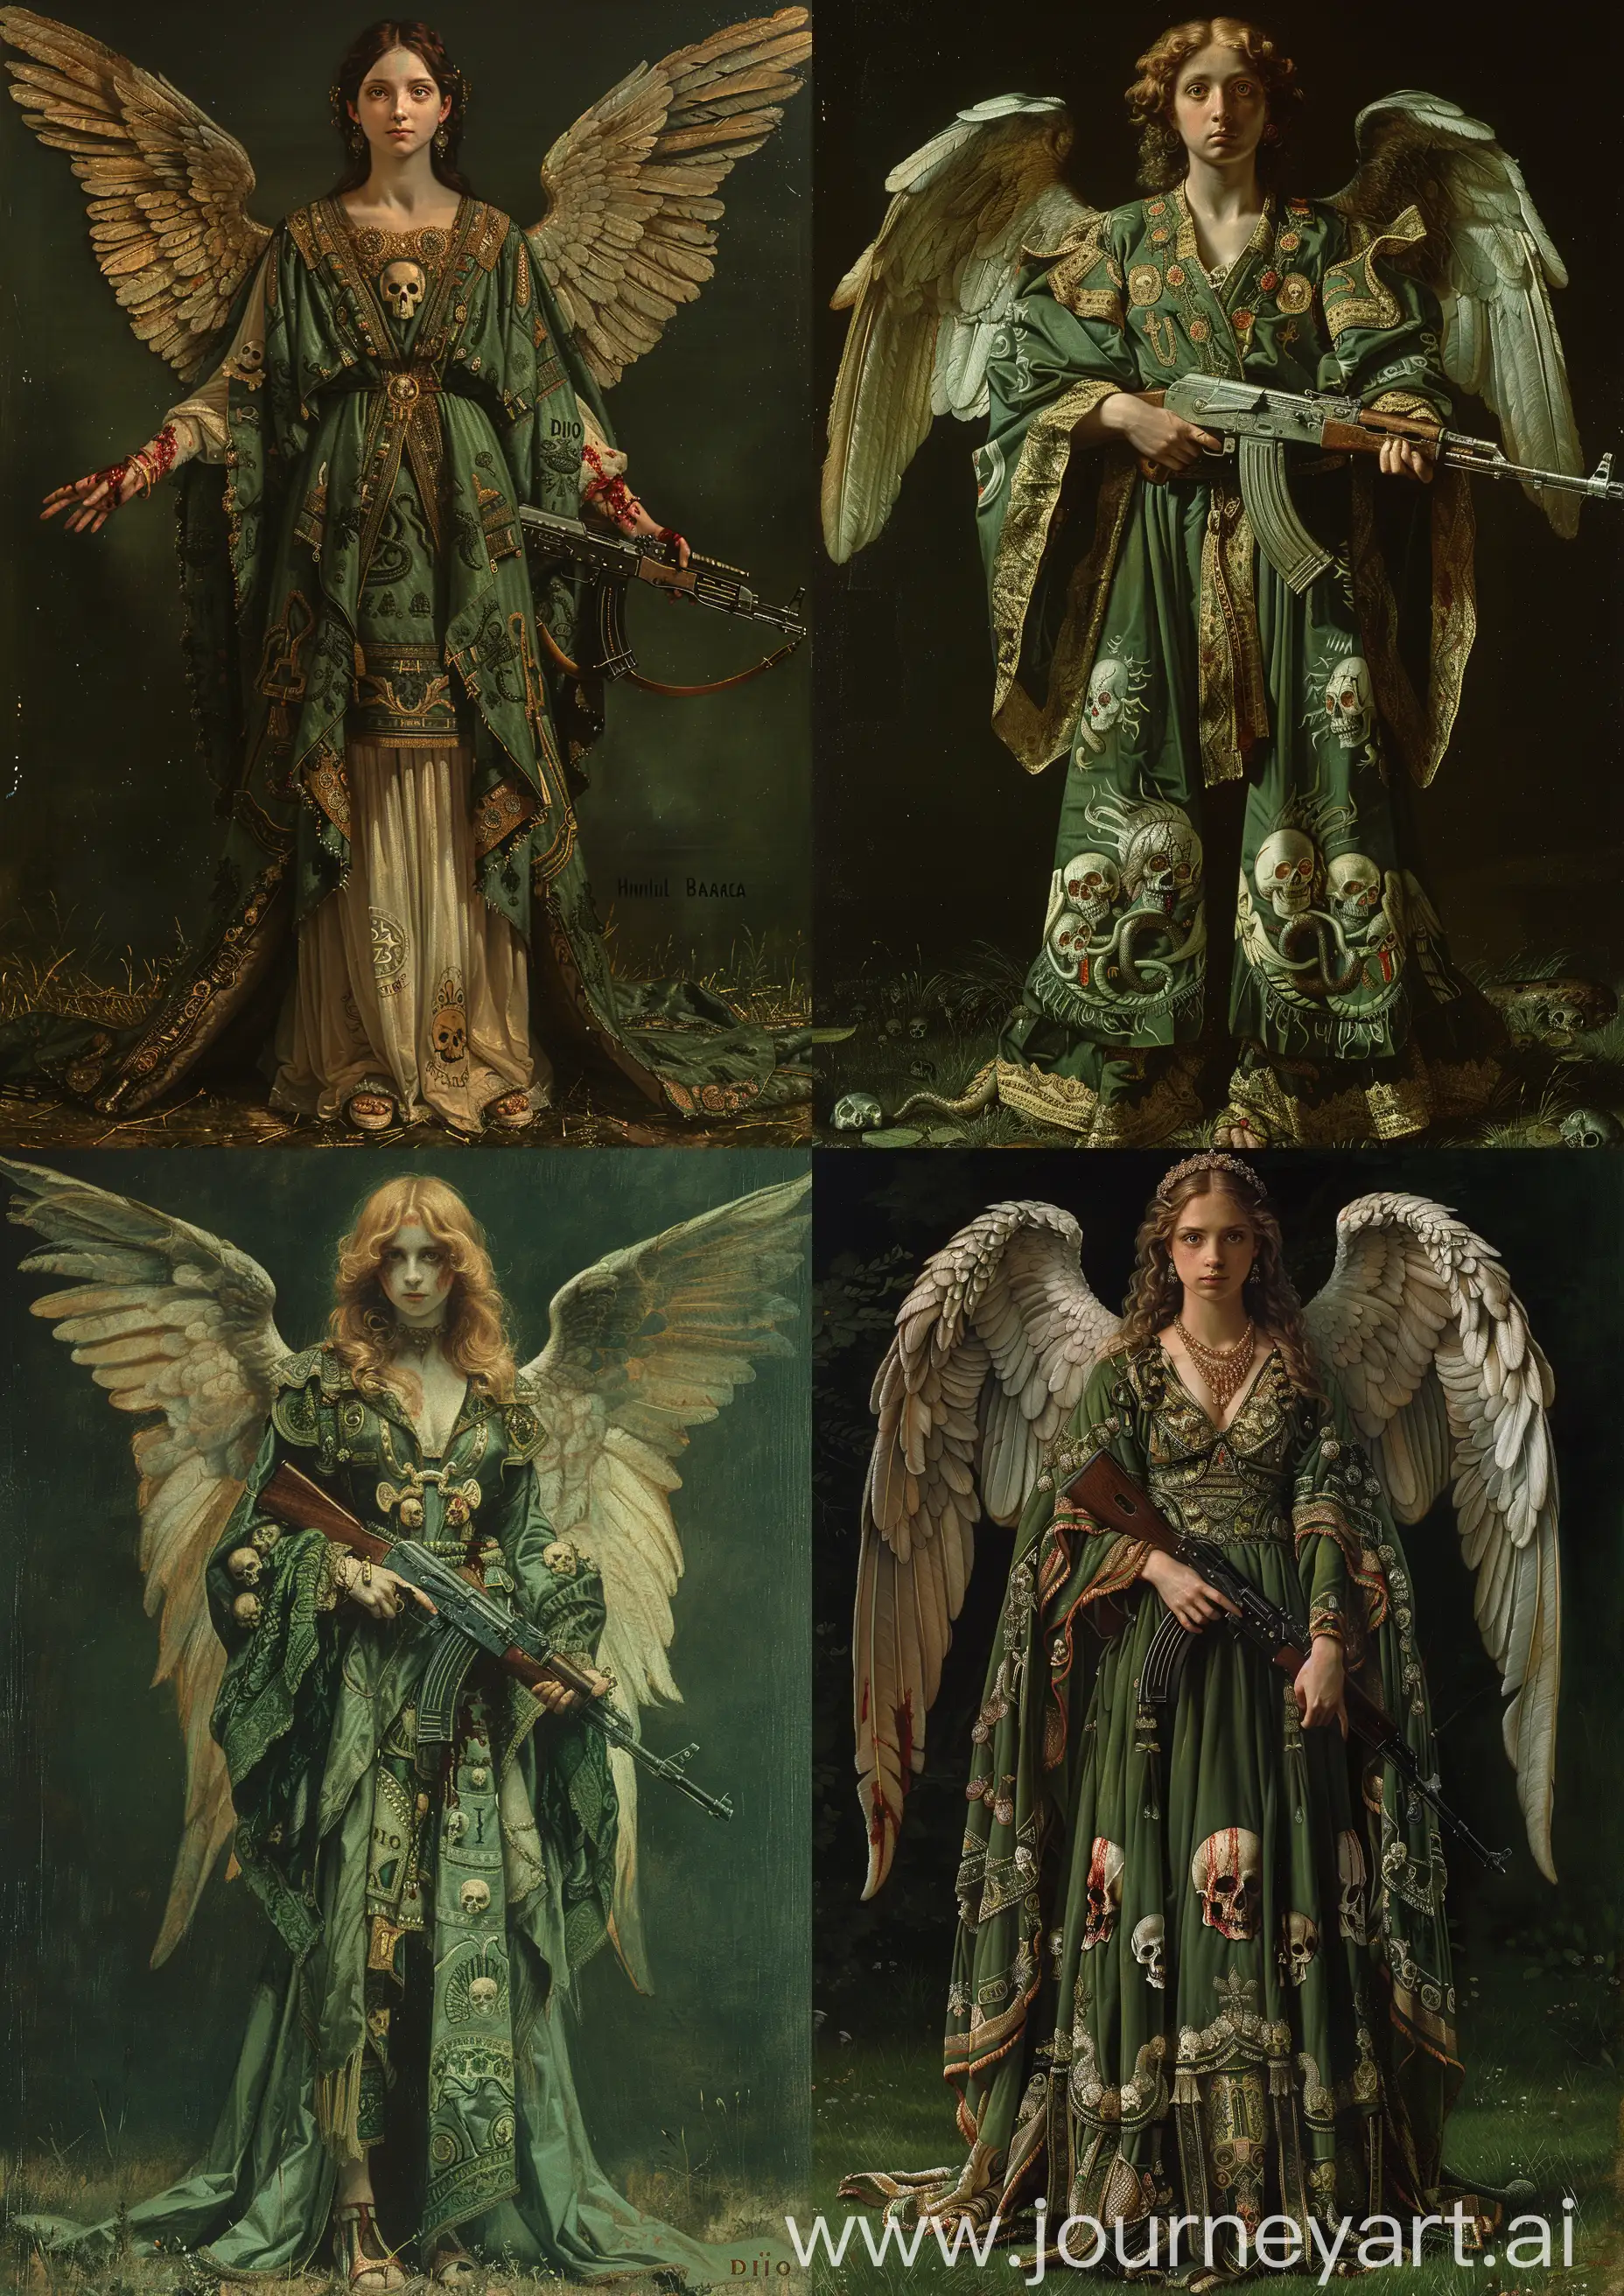 Edward Burne-Jones painting of Hannibal barca the famous queen of carthage "DIDO" having angels wings, in green ornate blood, skulls and snakes robes, welding a kalashnikov, standing on grass, earth tones, detailed, full body, --c 22 --s 750 --v 6.0 --ar 5:7

